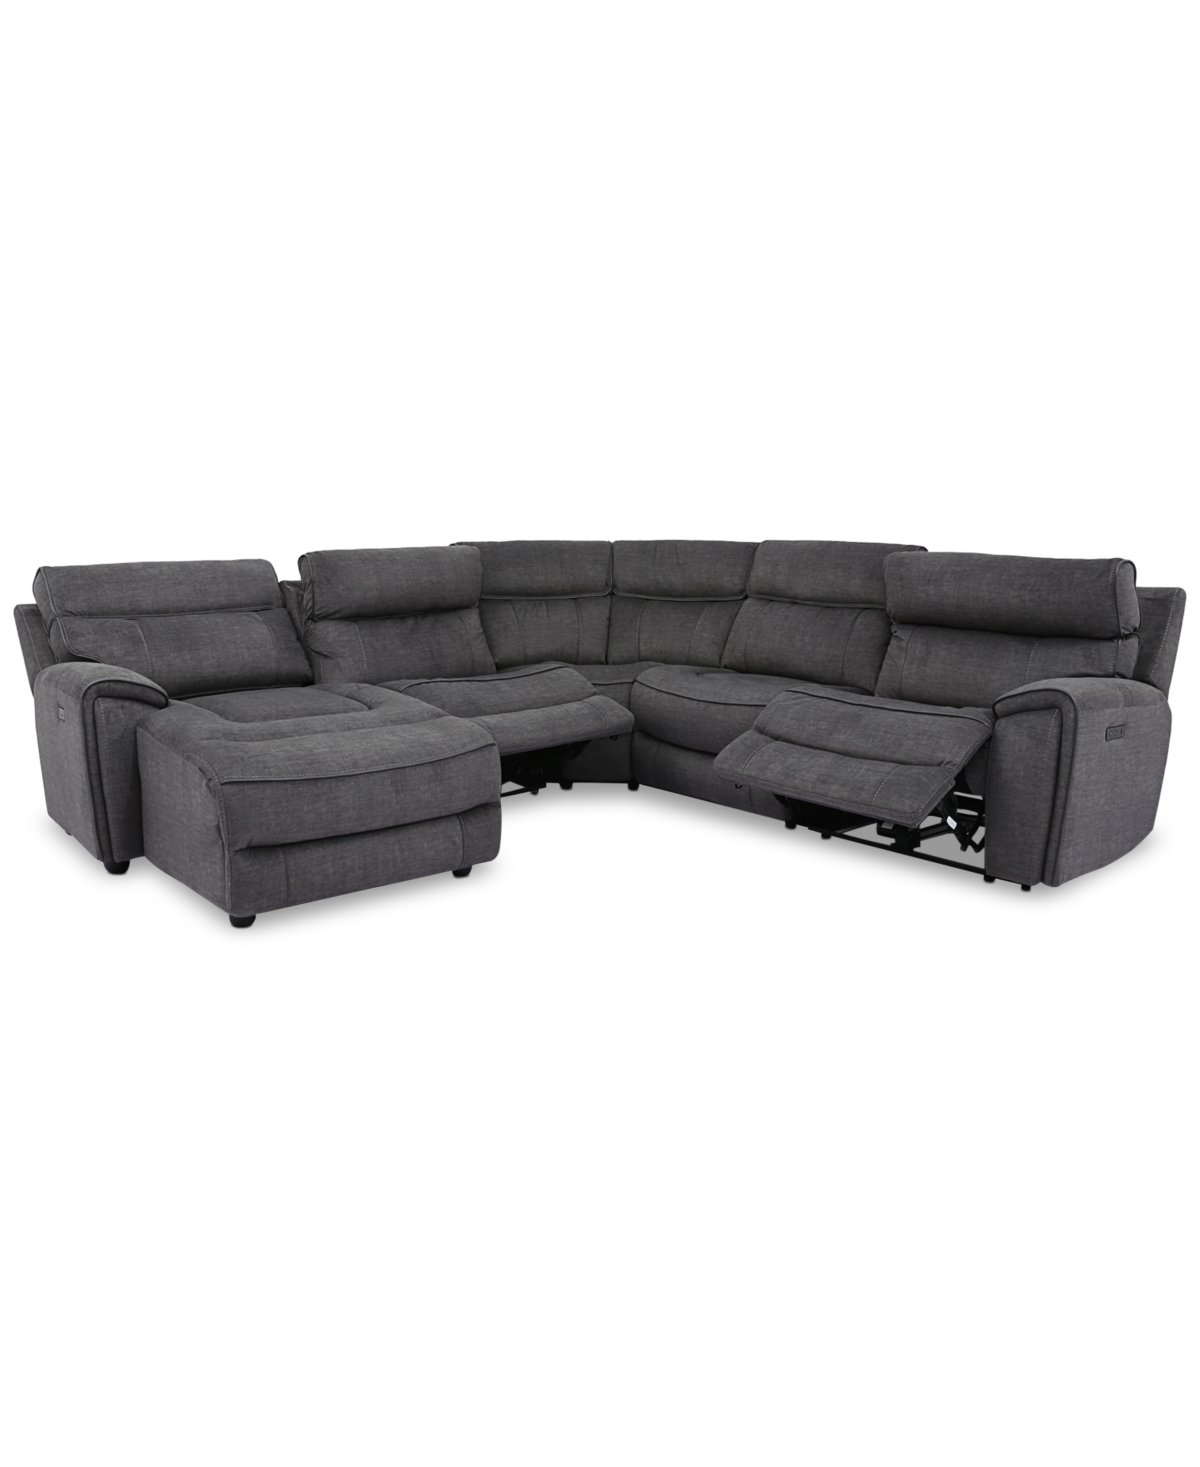 Furniture Hutchenson 5-pc. Fabric Chaise Sectional With 2 Power Recliners In Charcoal Moss